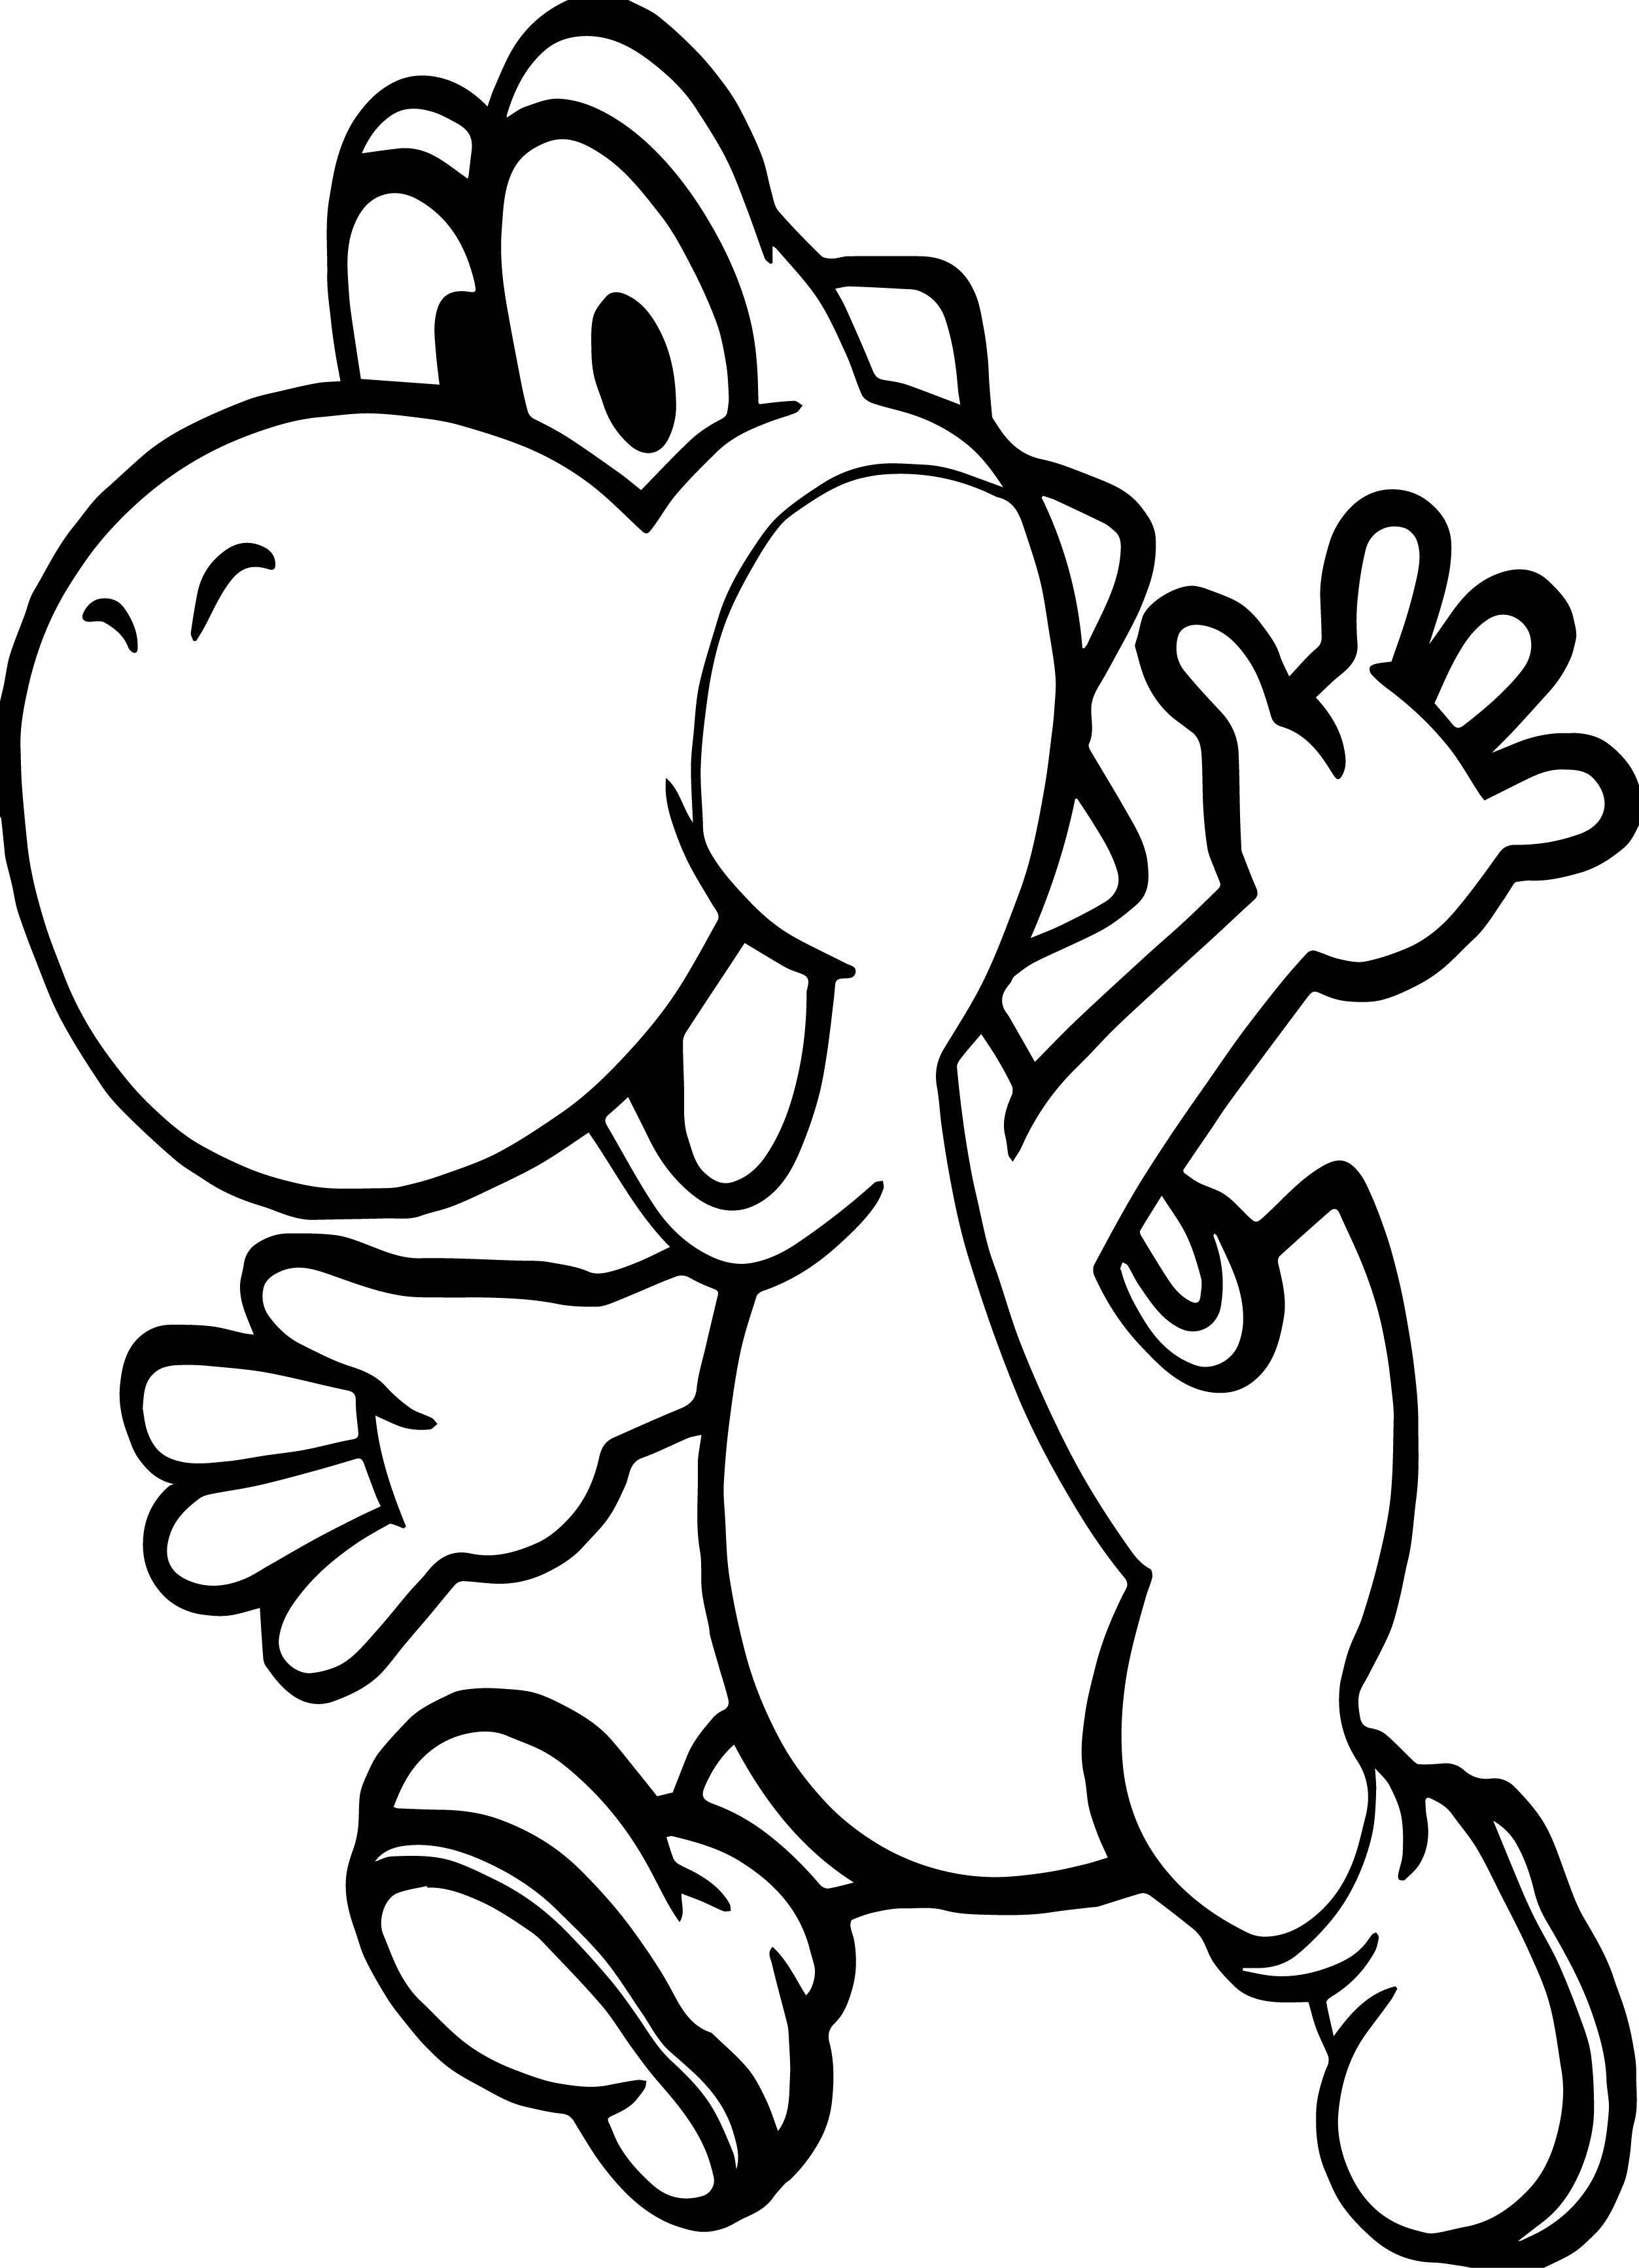 Yoshi Coloring Pages Pdf For Kids - Yoshi Coloring Pages